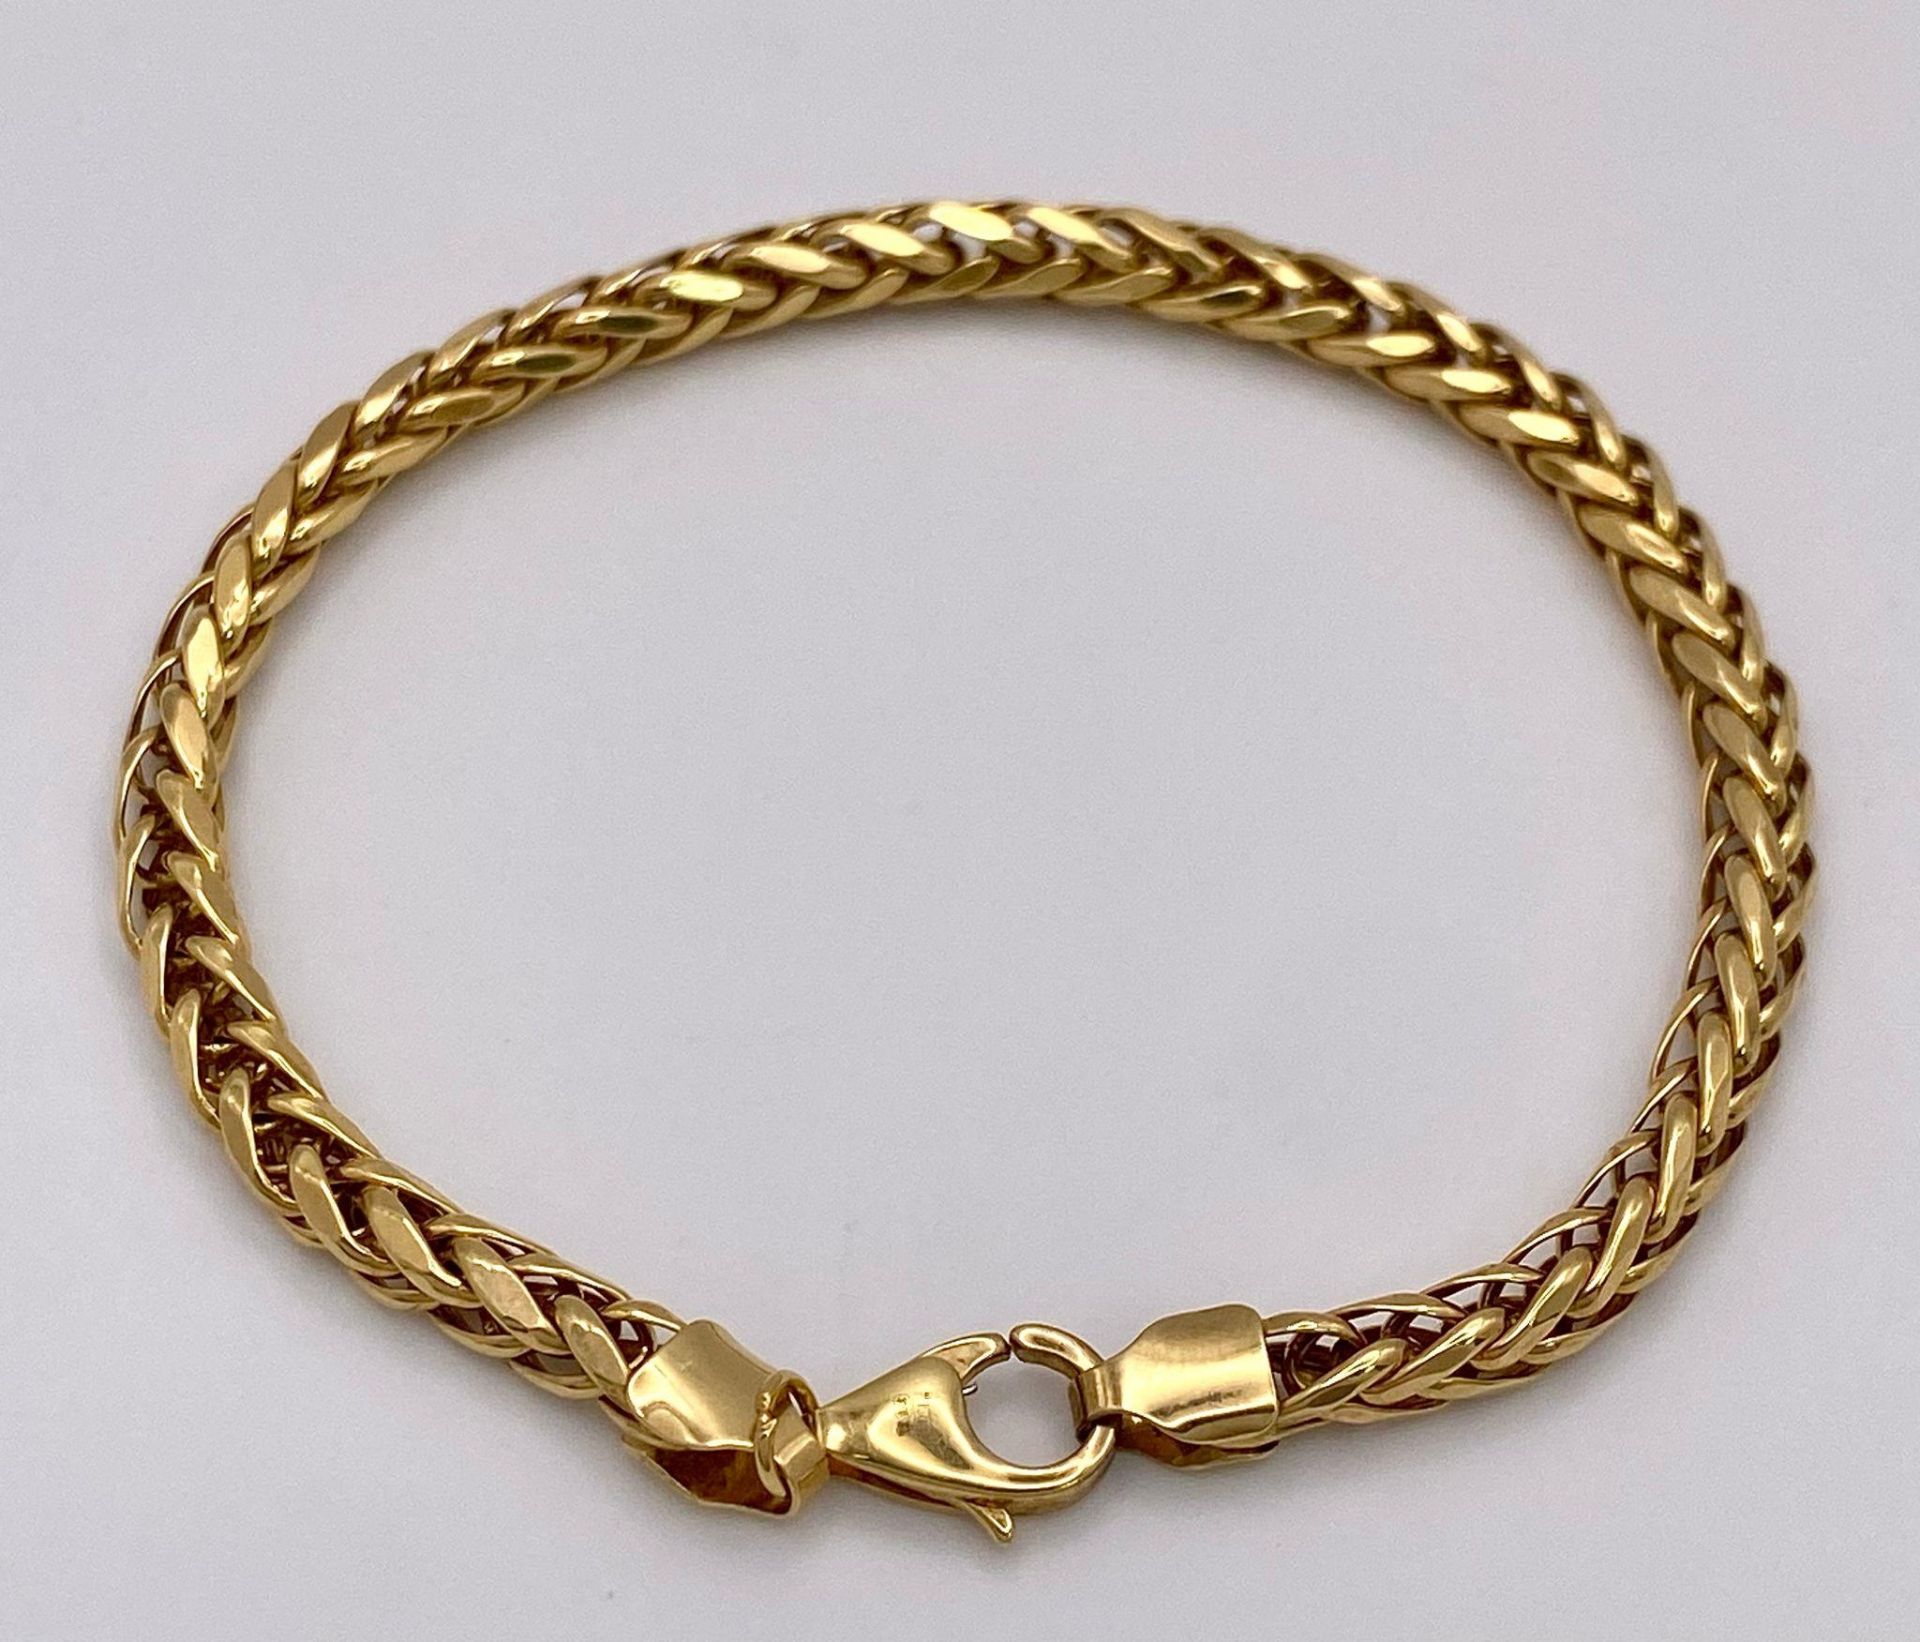 A 9K Yellow Gold Intricate Link Bracelet. 18cm. 5g weight. - Image 4 of 6